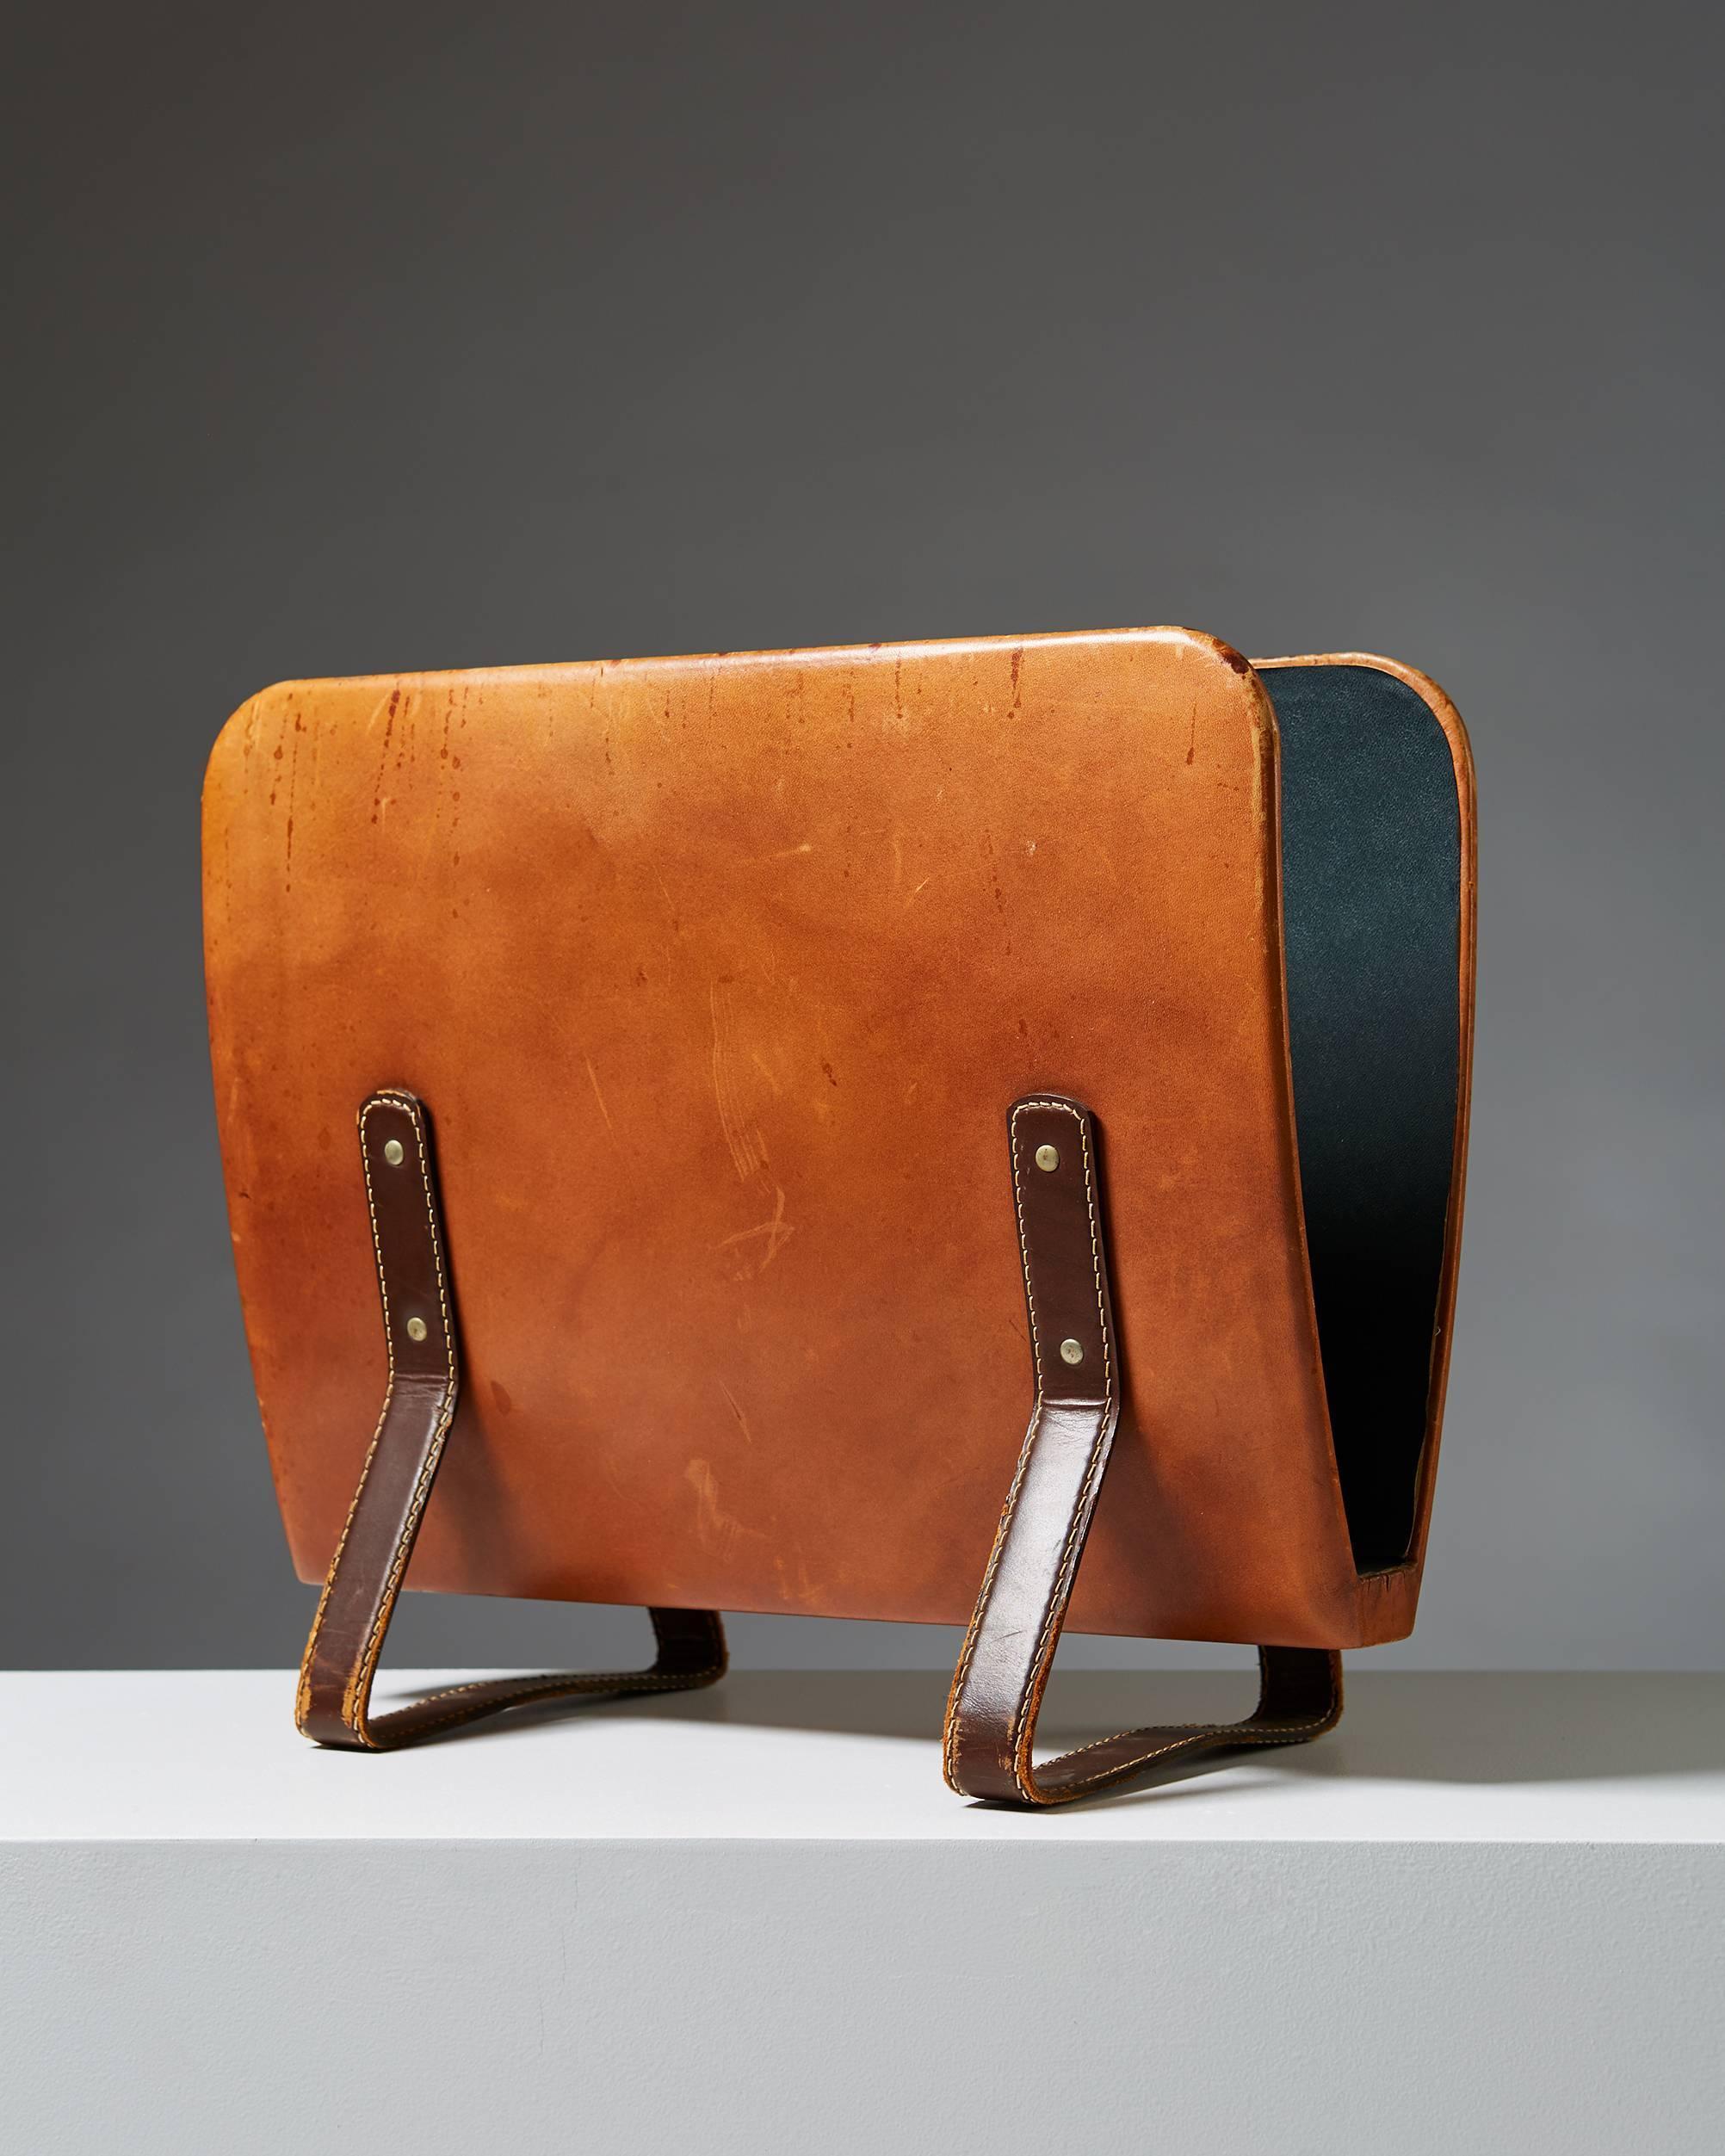 Magazine stand, anonymous, 
England, 1950s. 
Leather covered brass.

Measure: L 40 cm/ 15 3/4''
 W 15 cm/ 6''
 H 35 cm/ 13 3/4''.